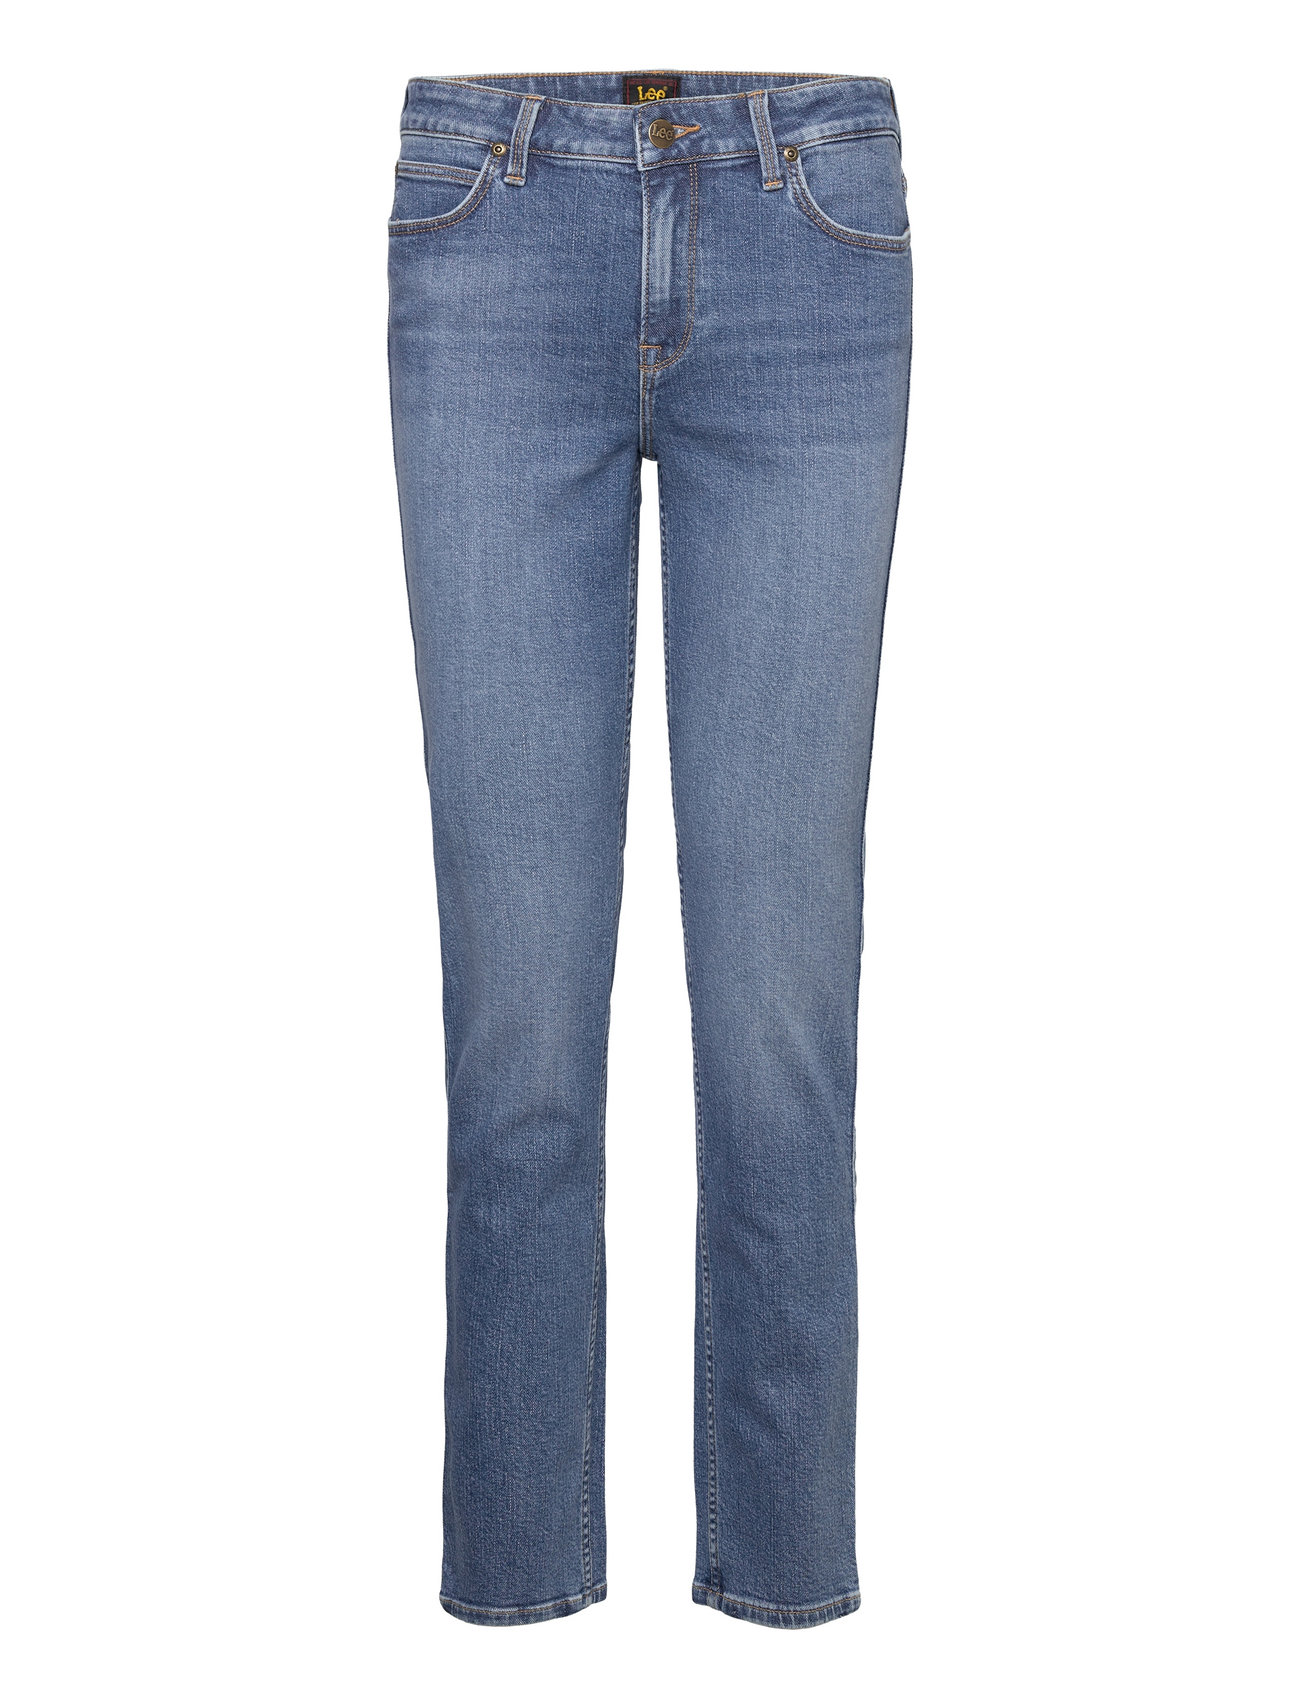 Lee Jeans Elly - Jeans slim - Boozt.com